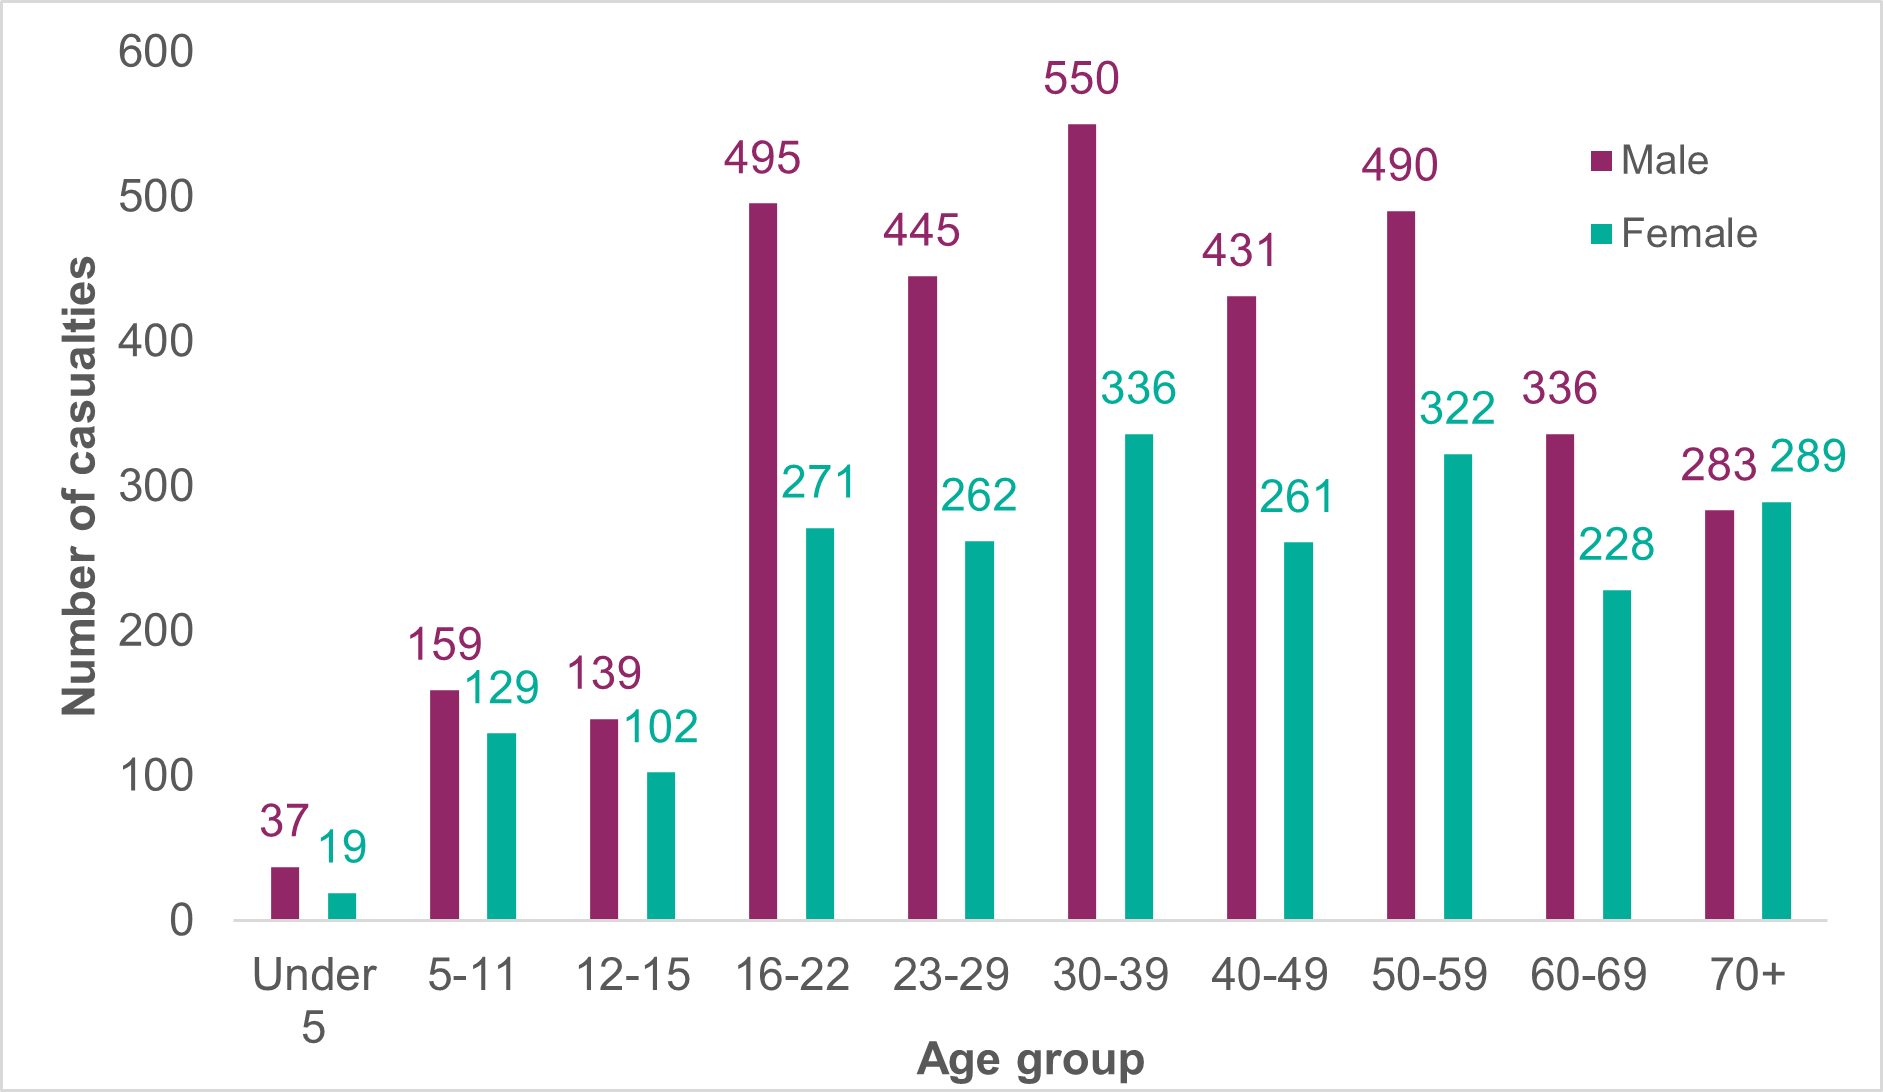 Figure 7: Number of casualties by gender and age, 2022 - as described in text above